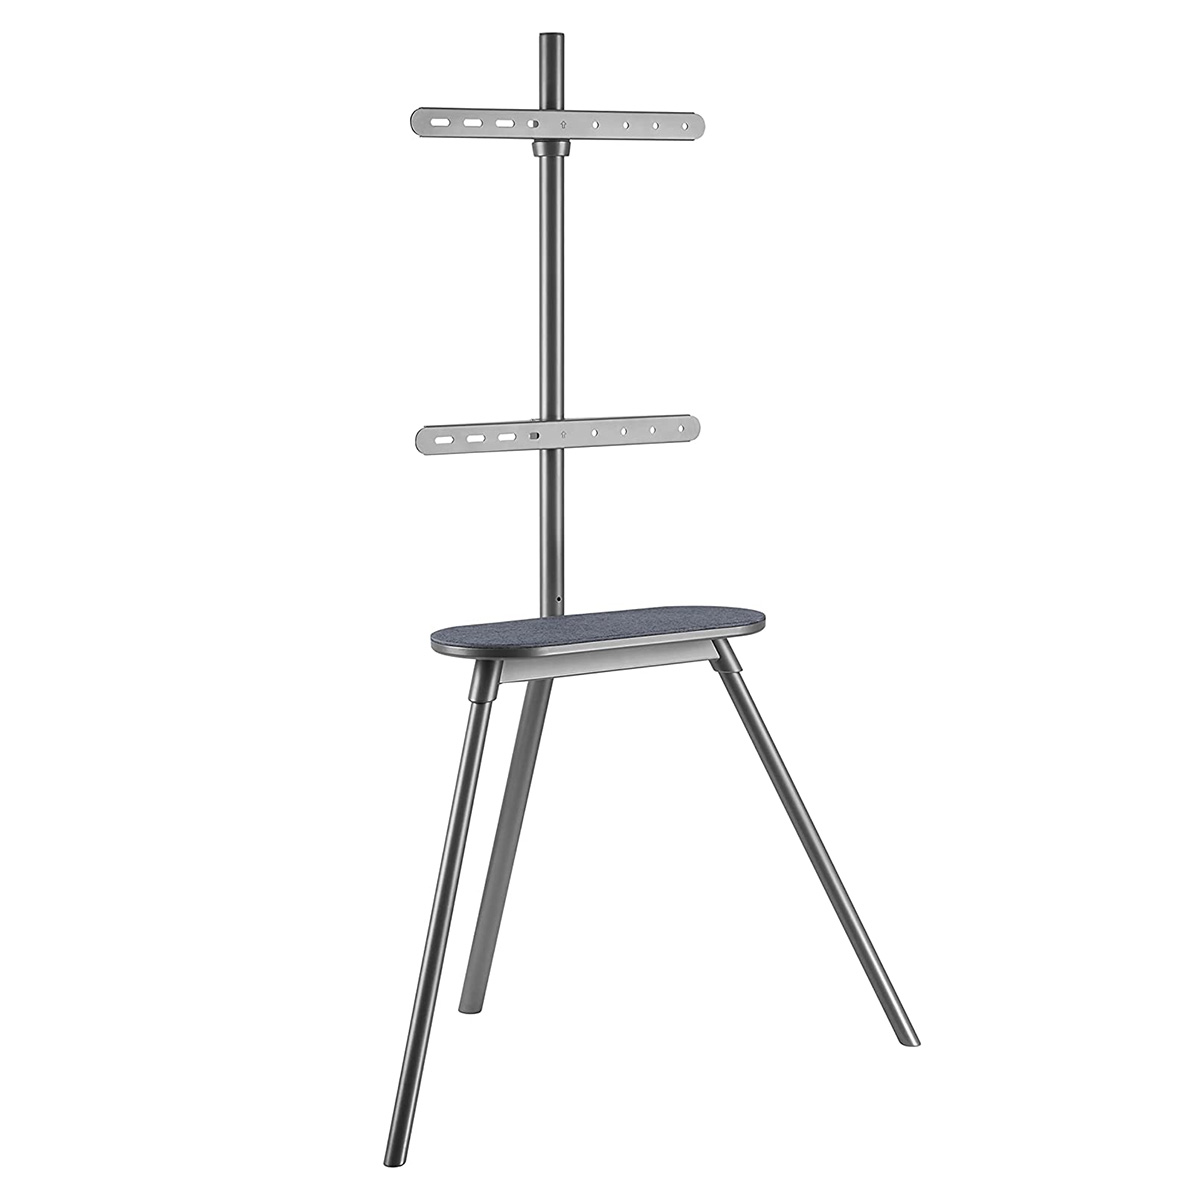 AVT-4365 Artistic Tripod / Easel Studio TV Display Stand with Shelf for 43″ to 65″ TV’s (Grey)